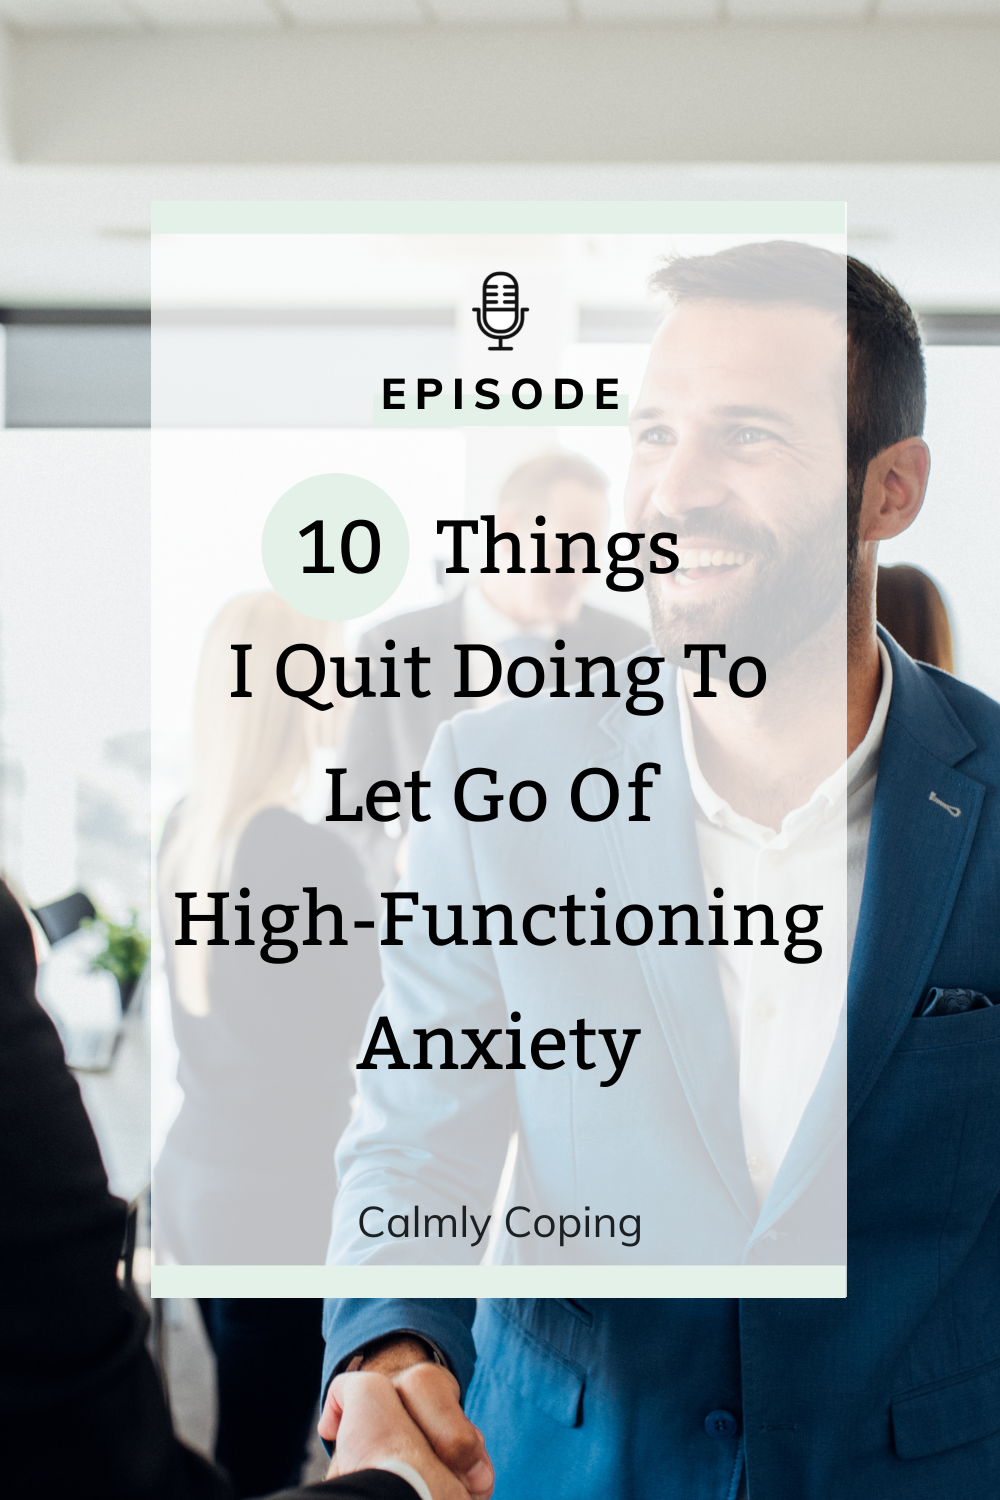 10 Things I Quit Doing To Let Go Of High-Functioning Anxiety